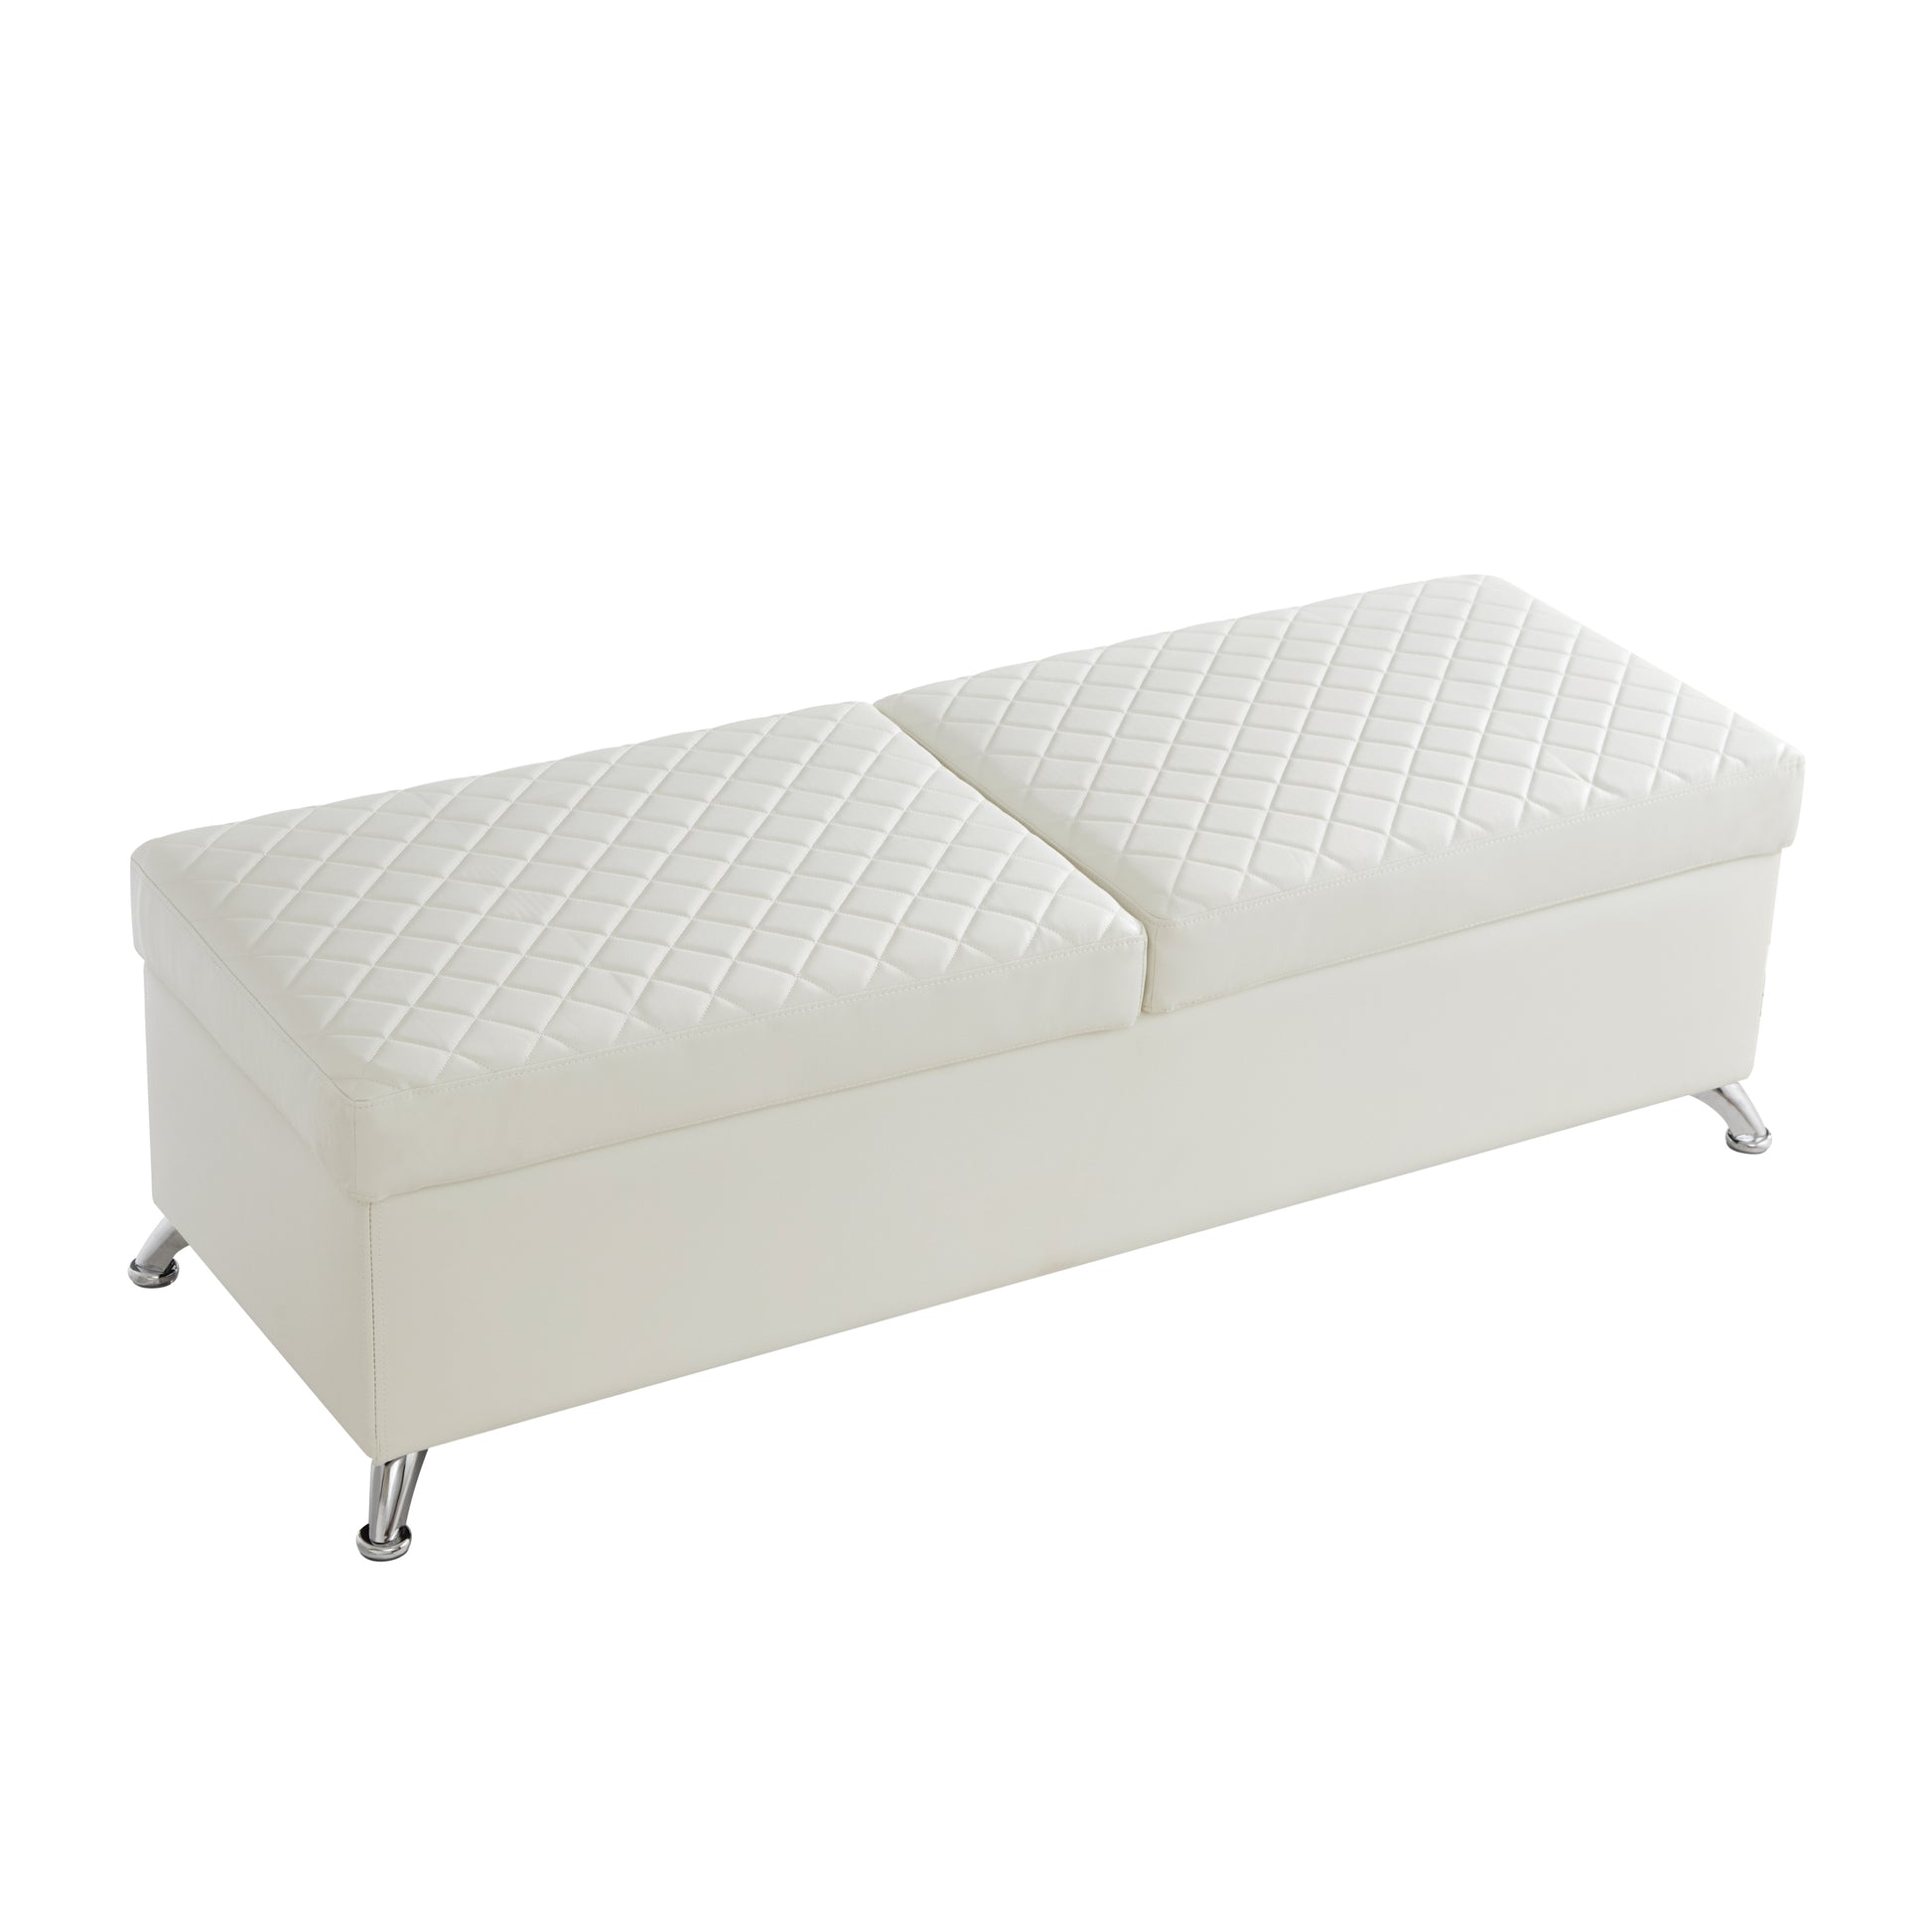 56.7" Bed Bench with Storage White Leather white-pu